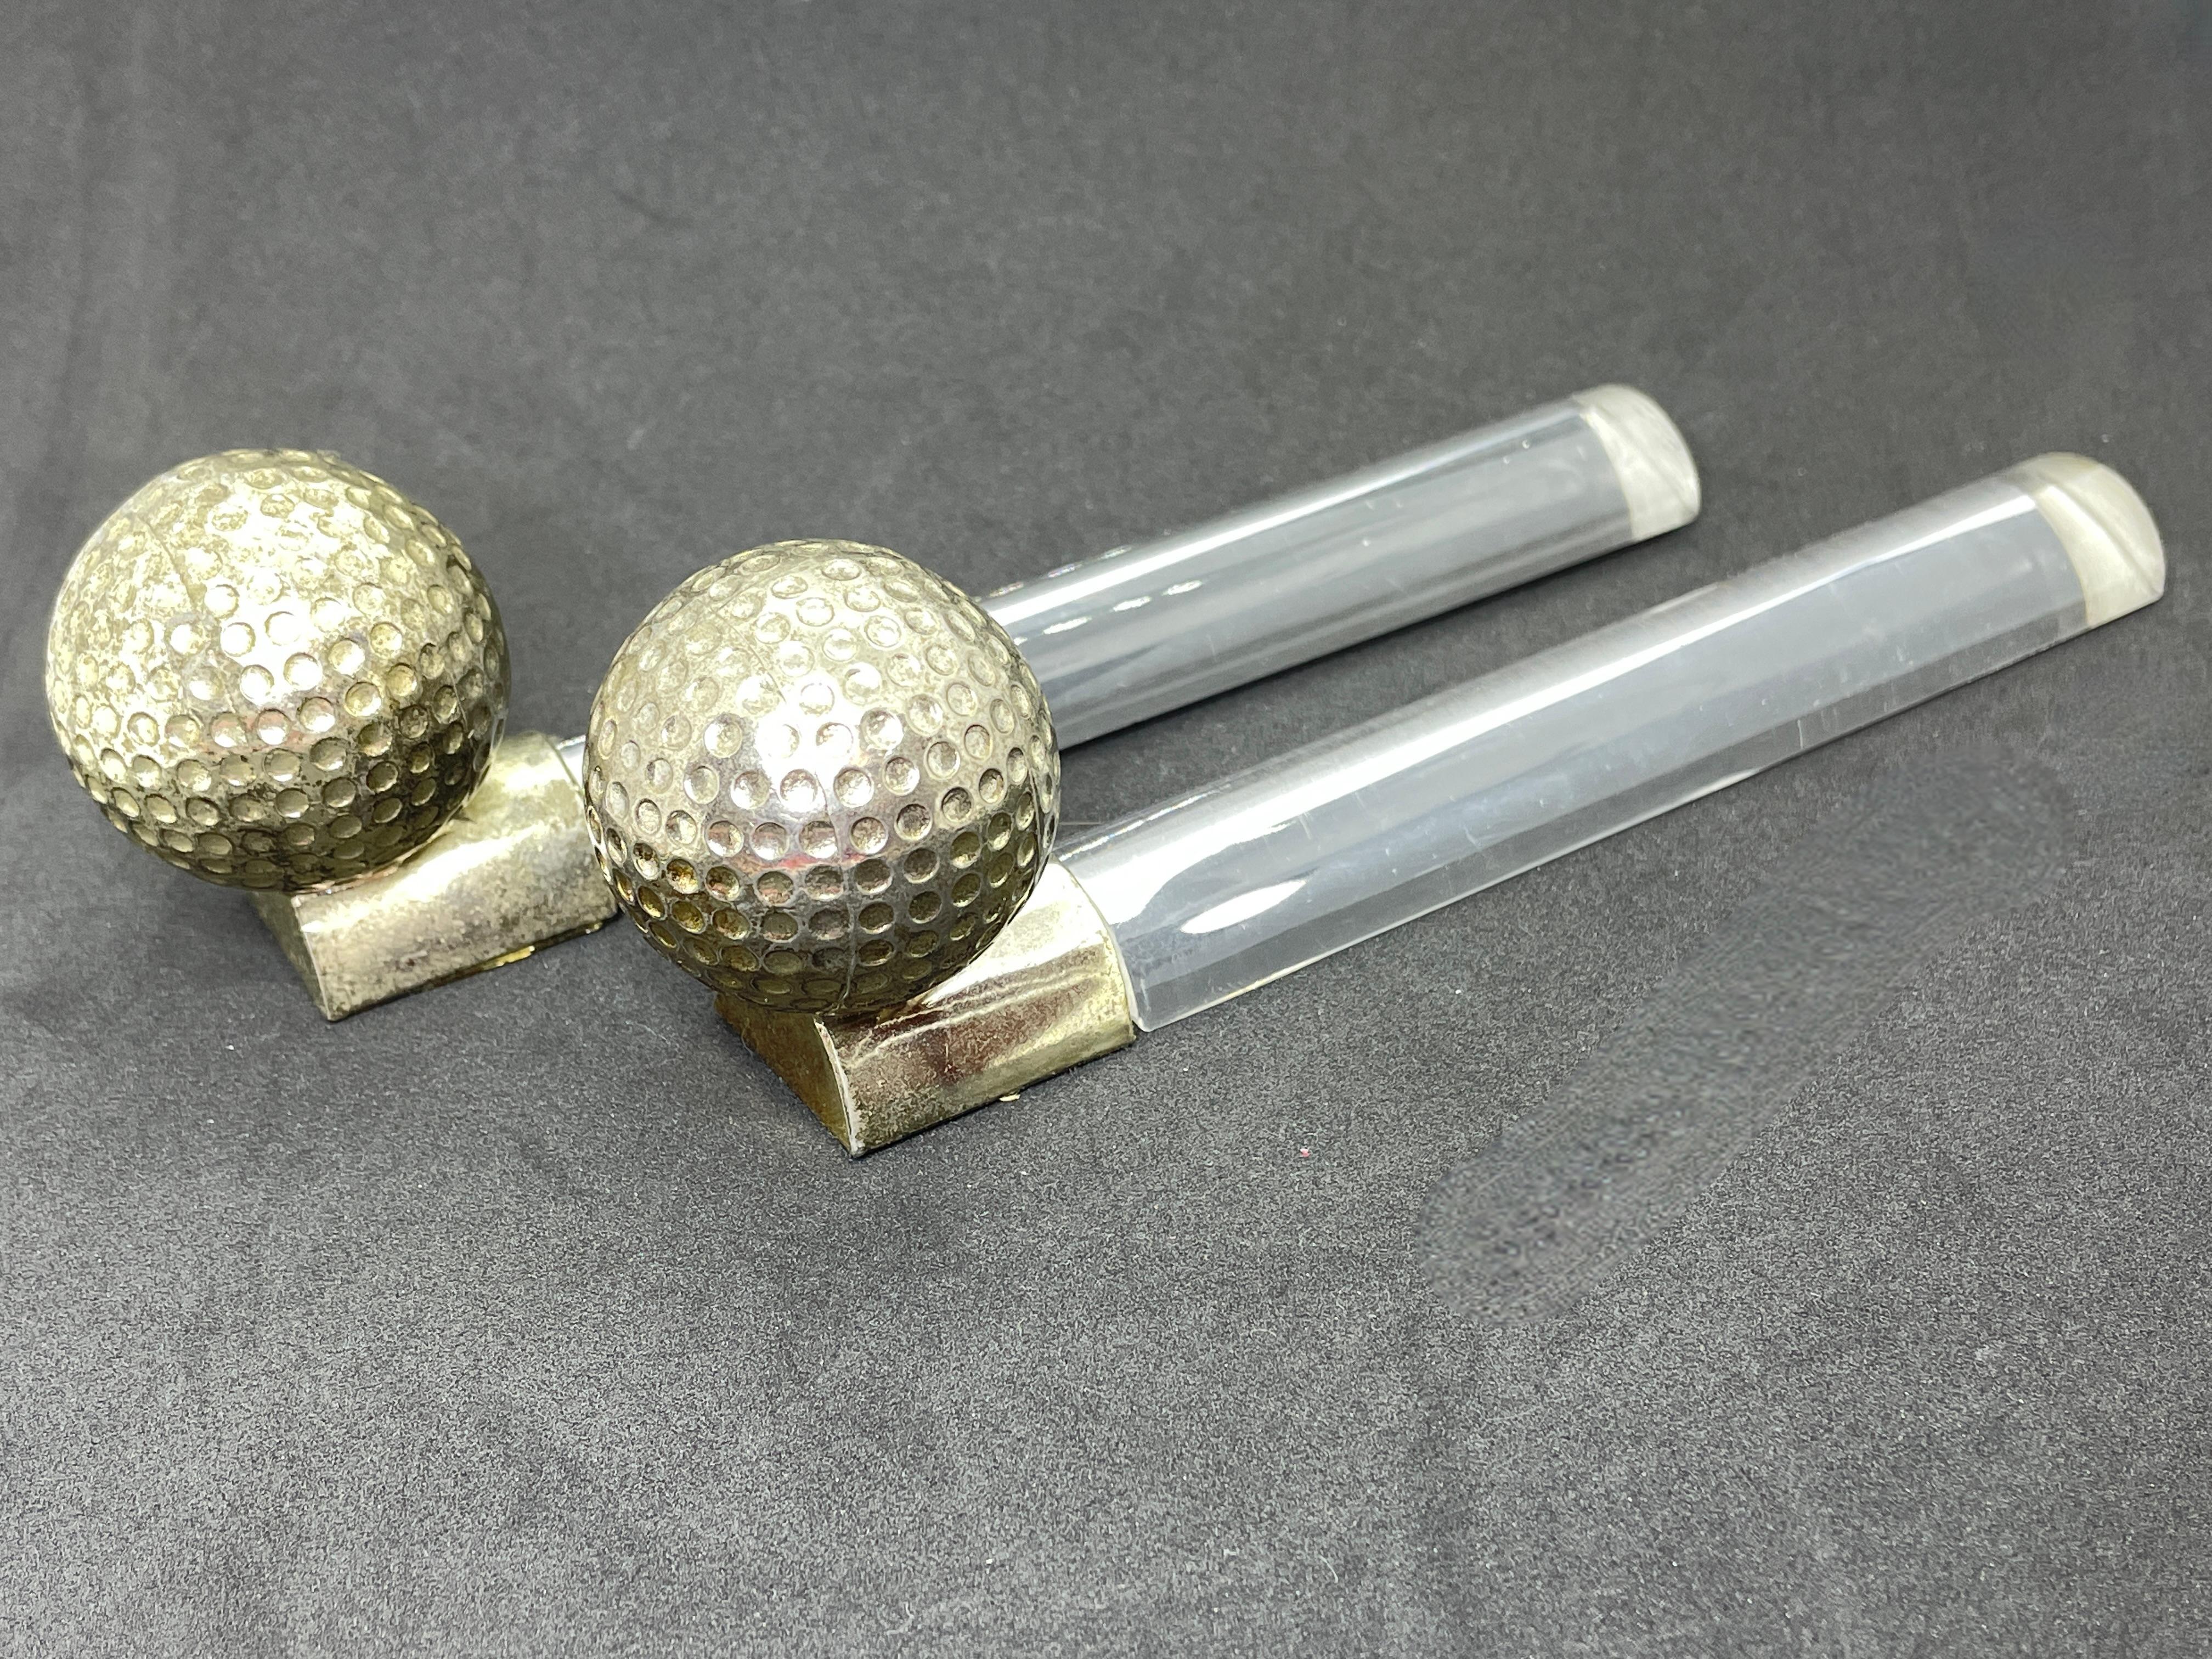 Super cool and nice design sculptural golf ball bookends. Nice golfball atop a nickel base. Nice addition to every room. Chrome with patina and one of the lucite stands with scratches like seen in the pictures. Think they will look great in a man